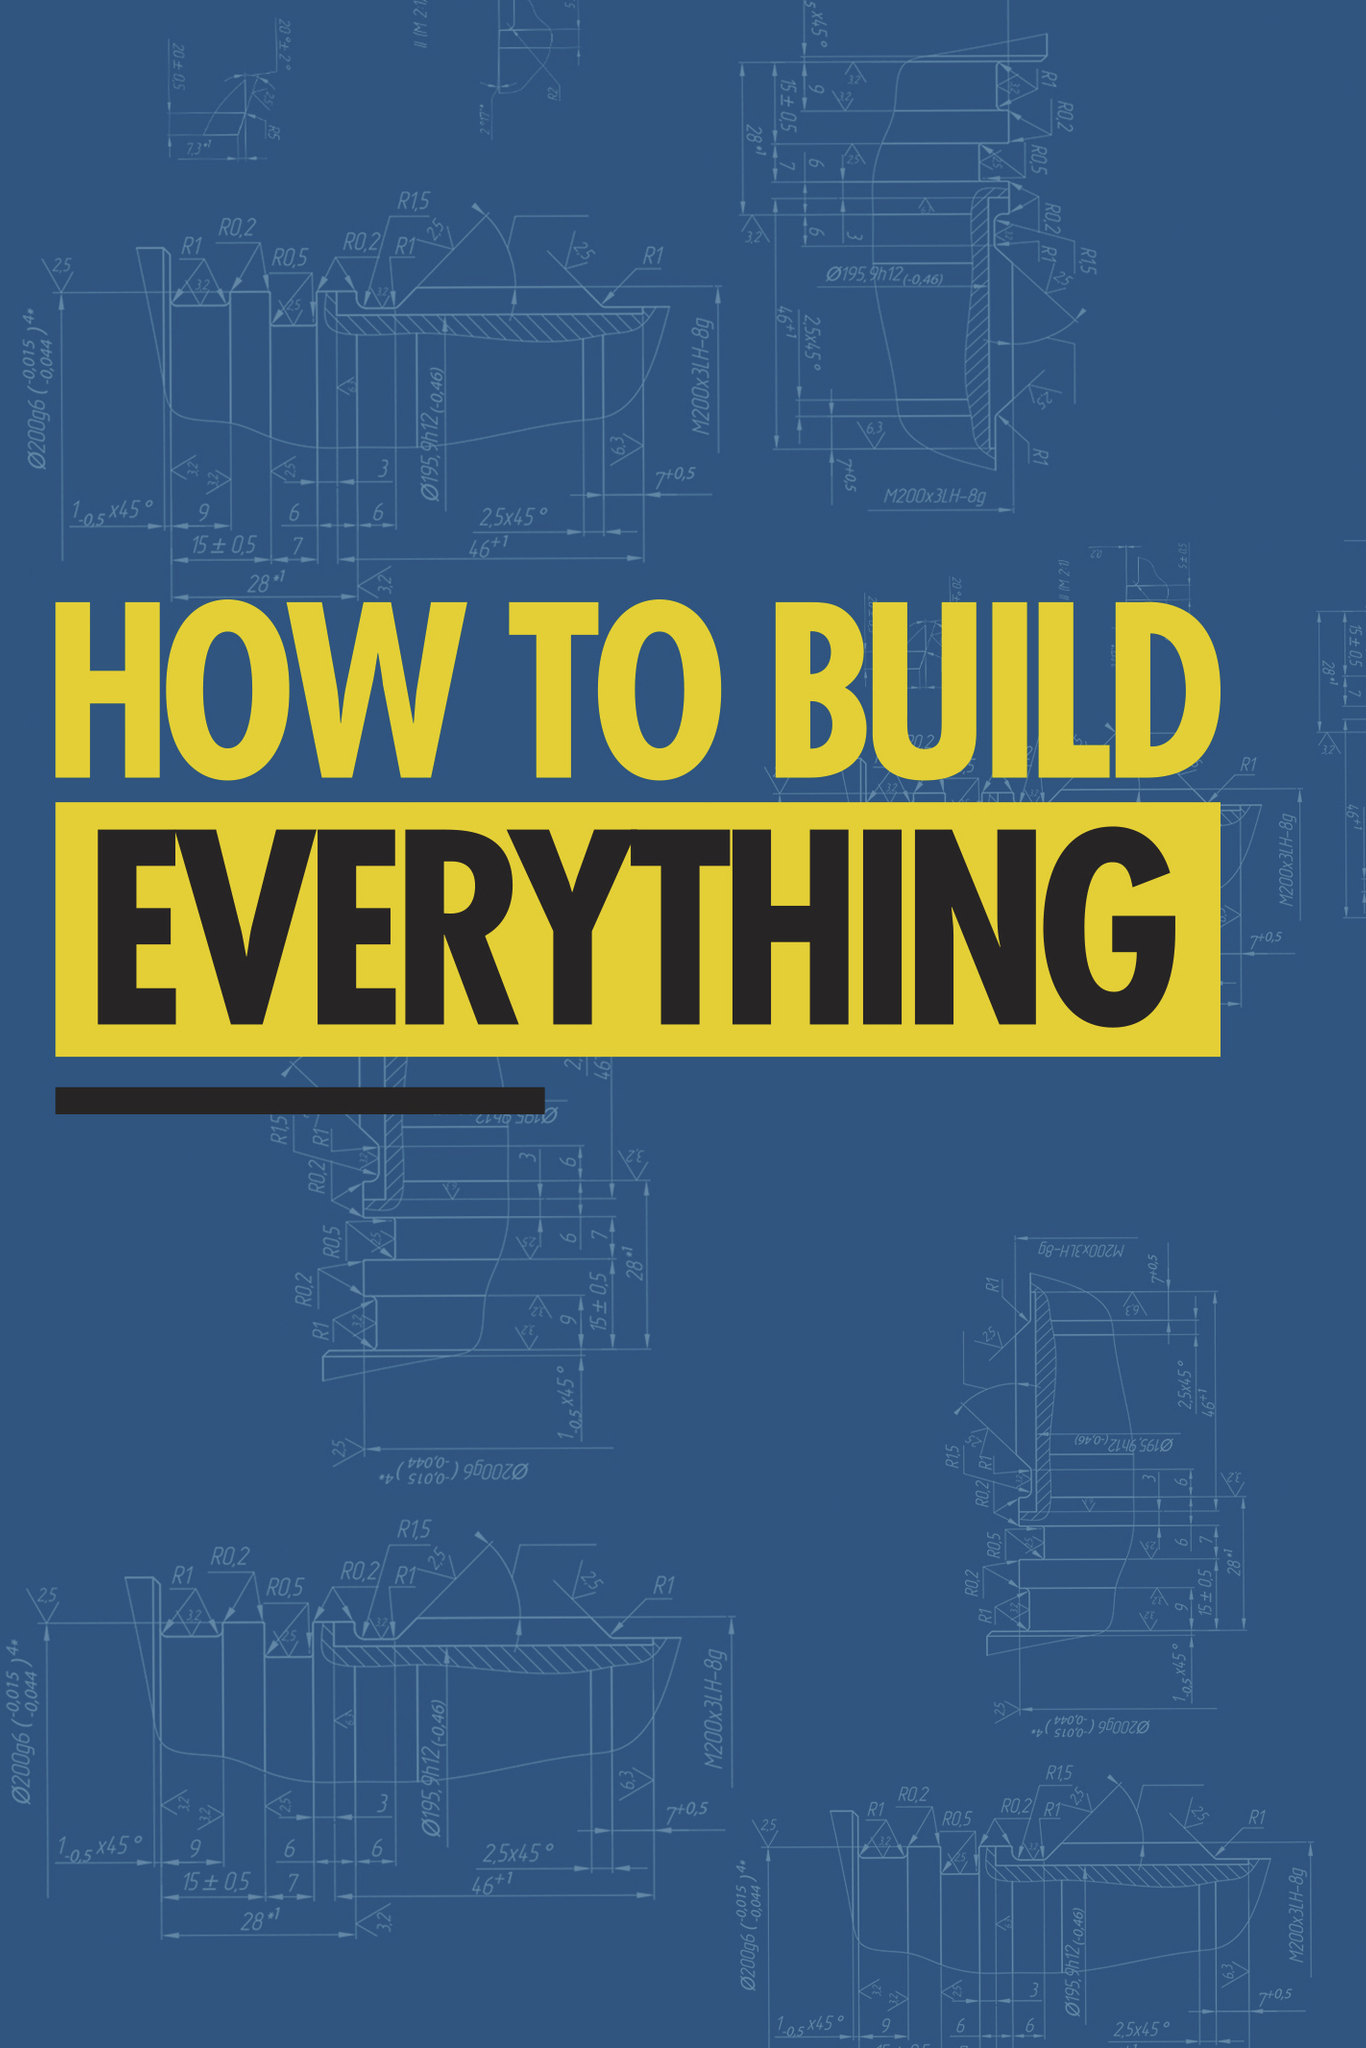 How to Build... Everything